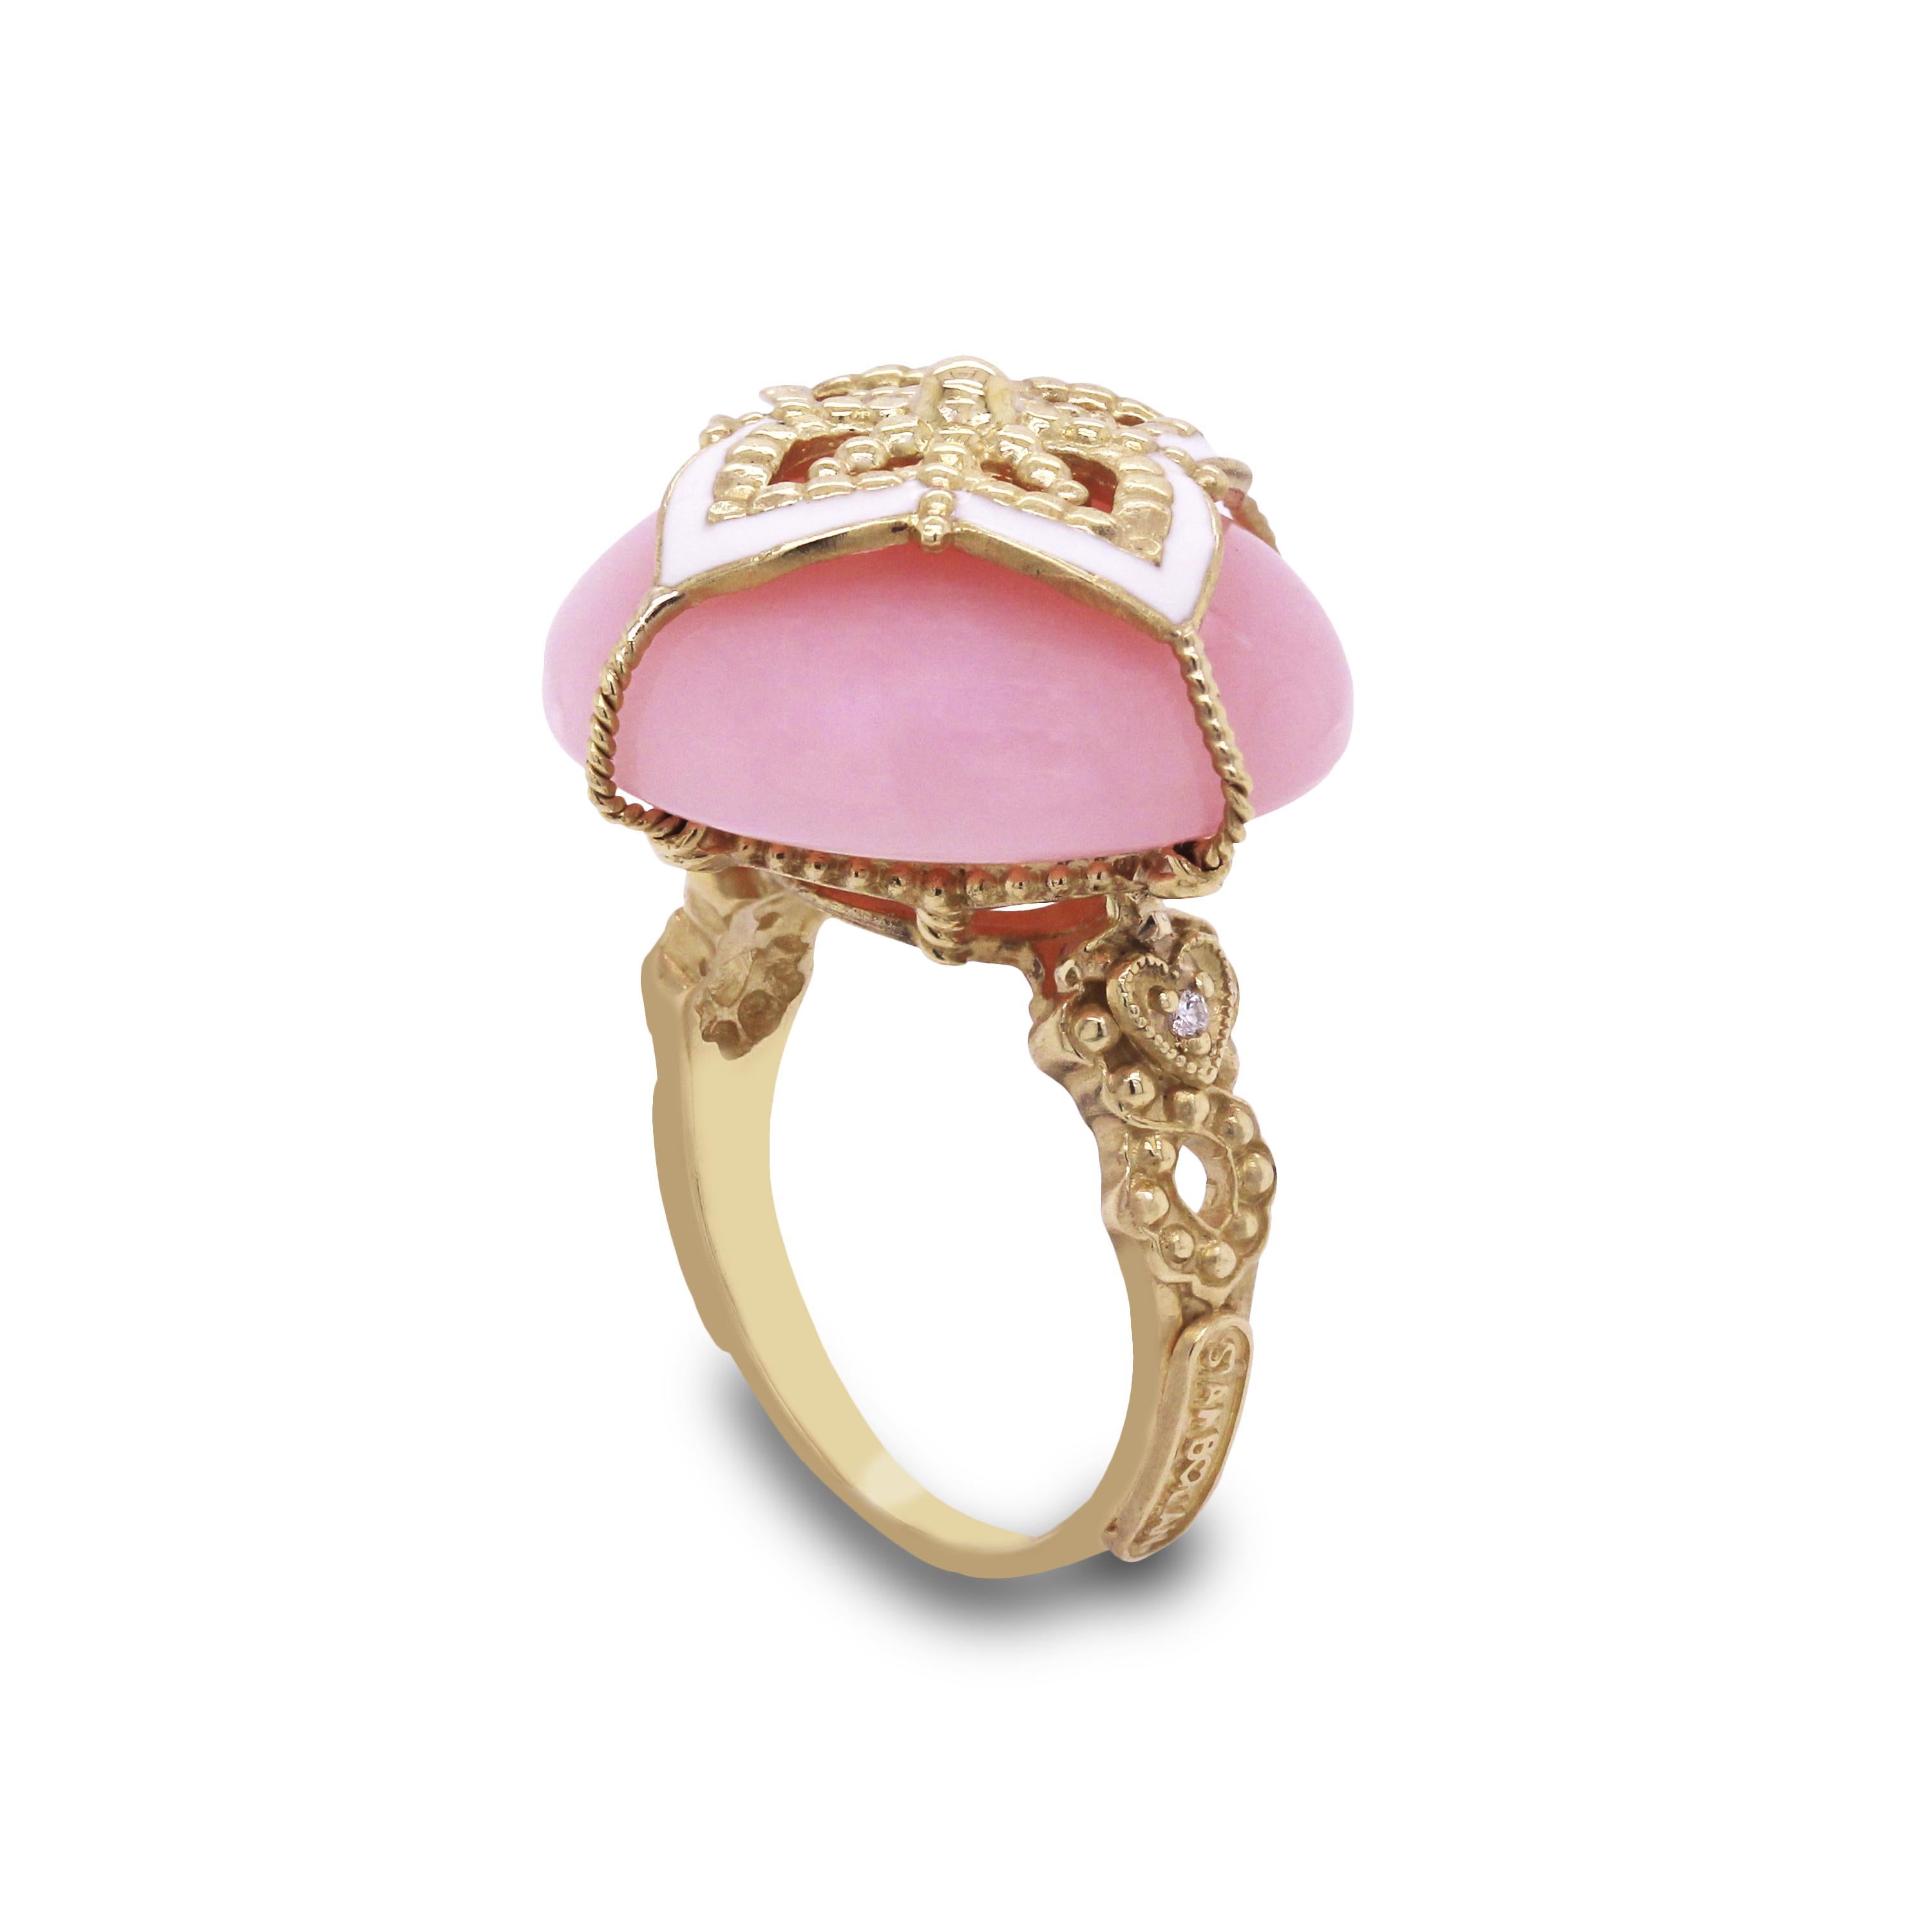 Stambolian Peruvian Pink Opal 18K Yellow Gold and White Enamel Cocktail Ring

From the Stambolian 